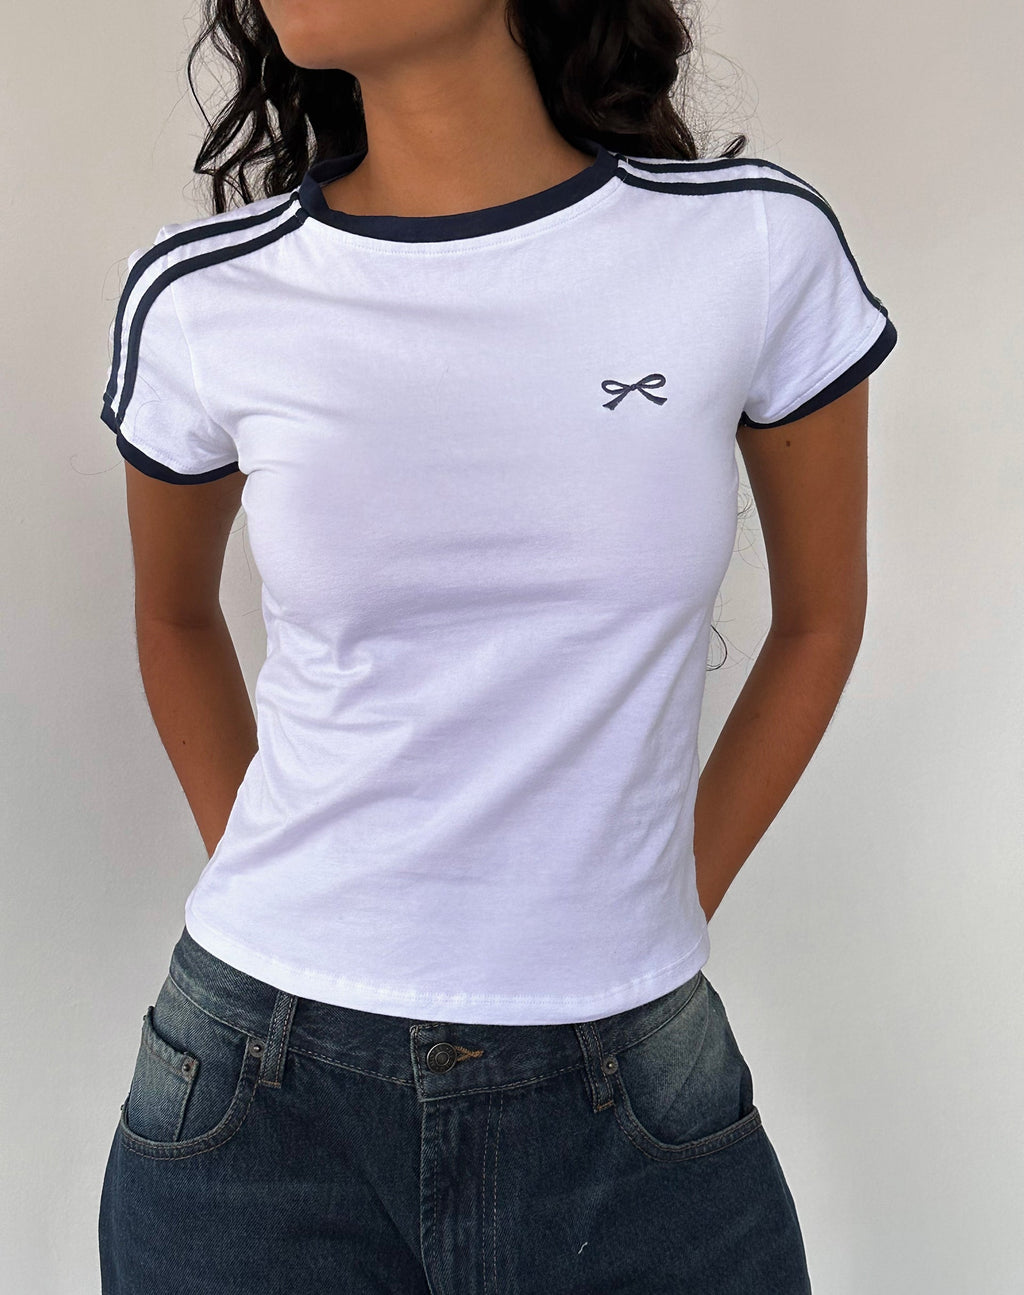 Salda Sporty Tee in White with Navy Binding